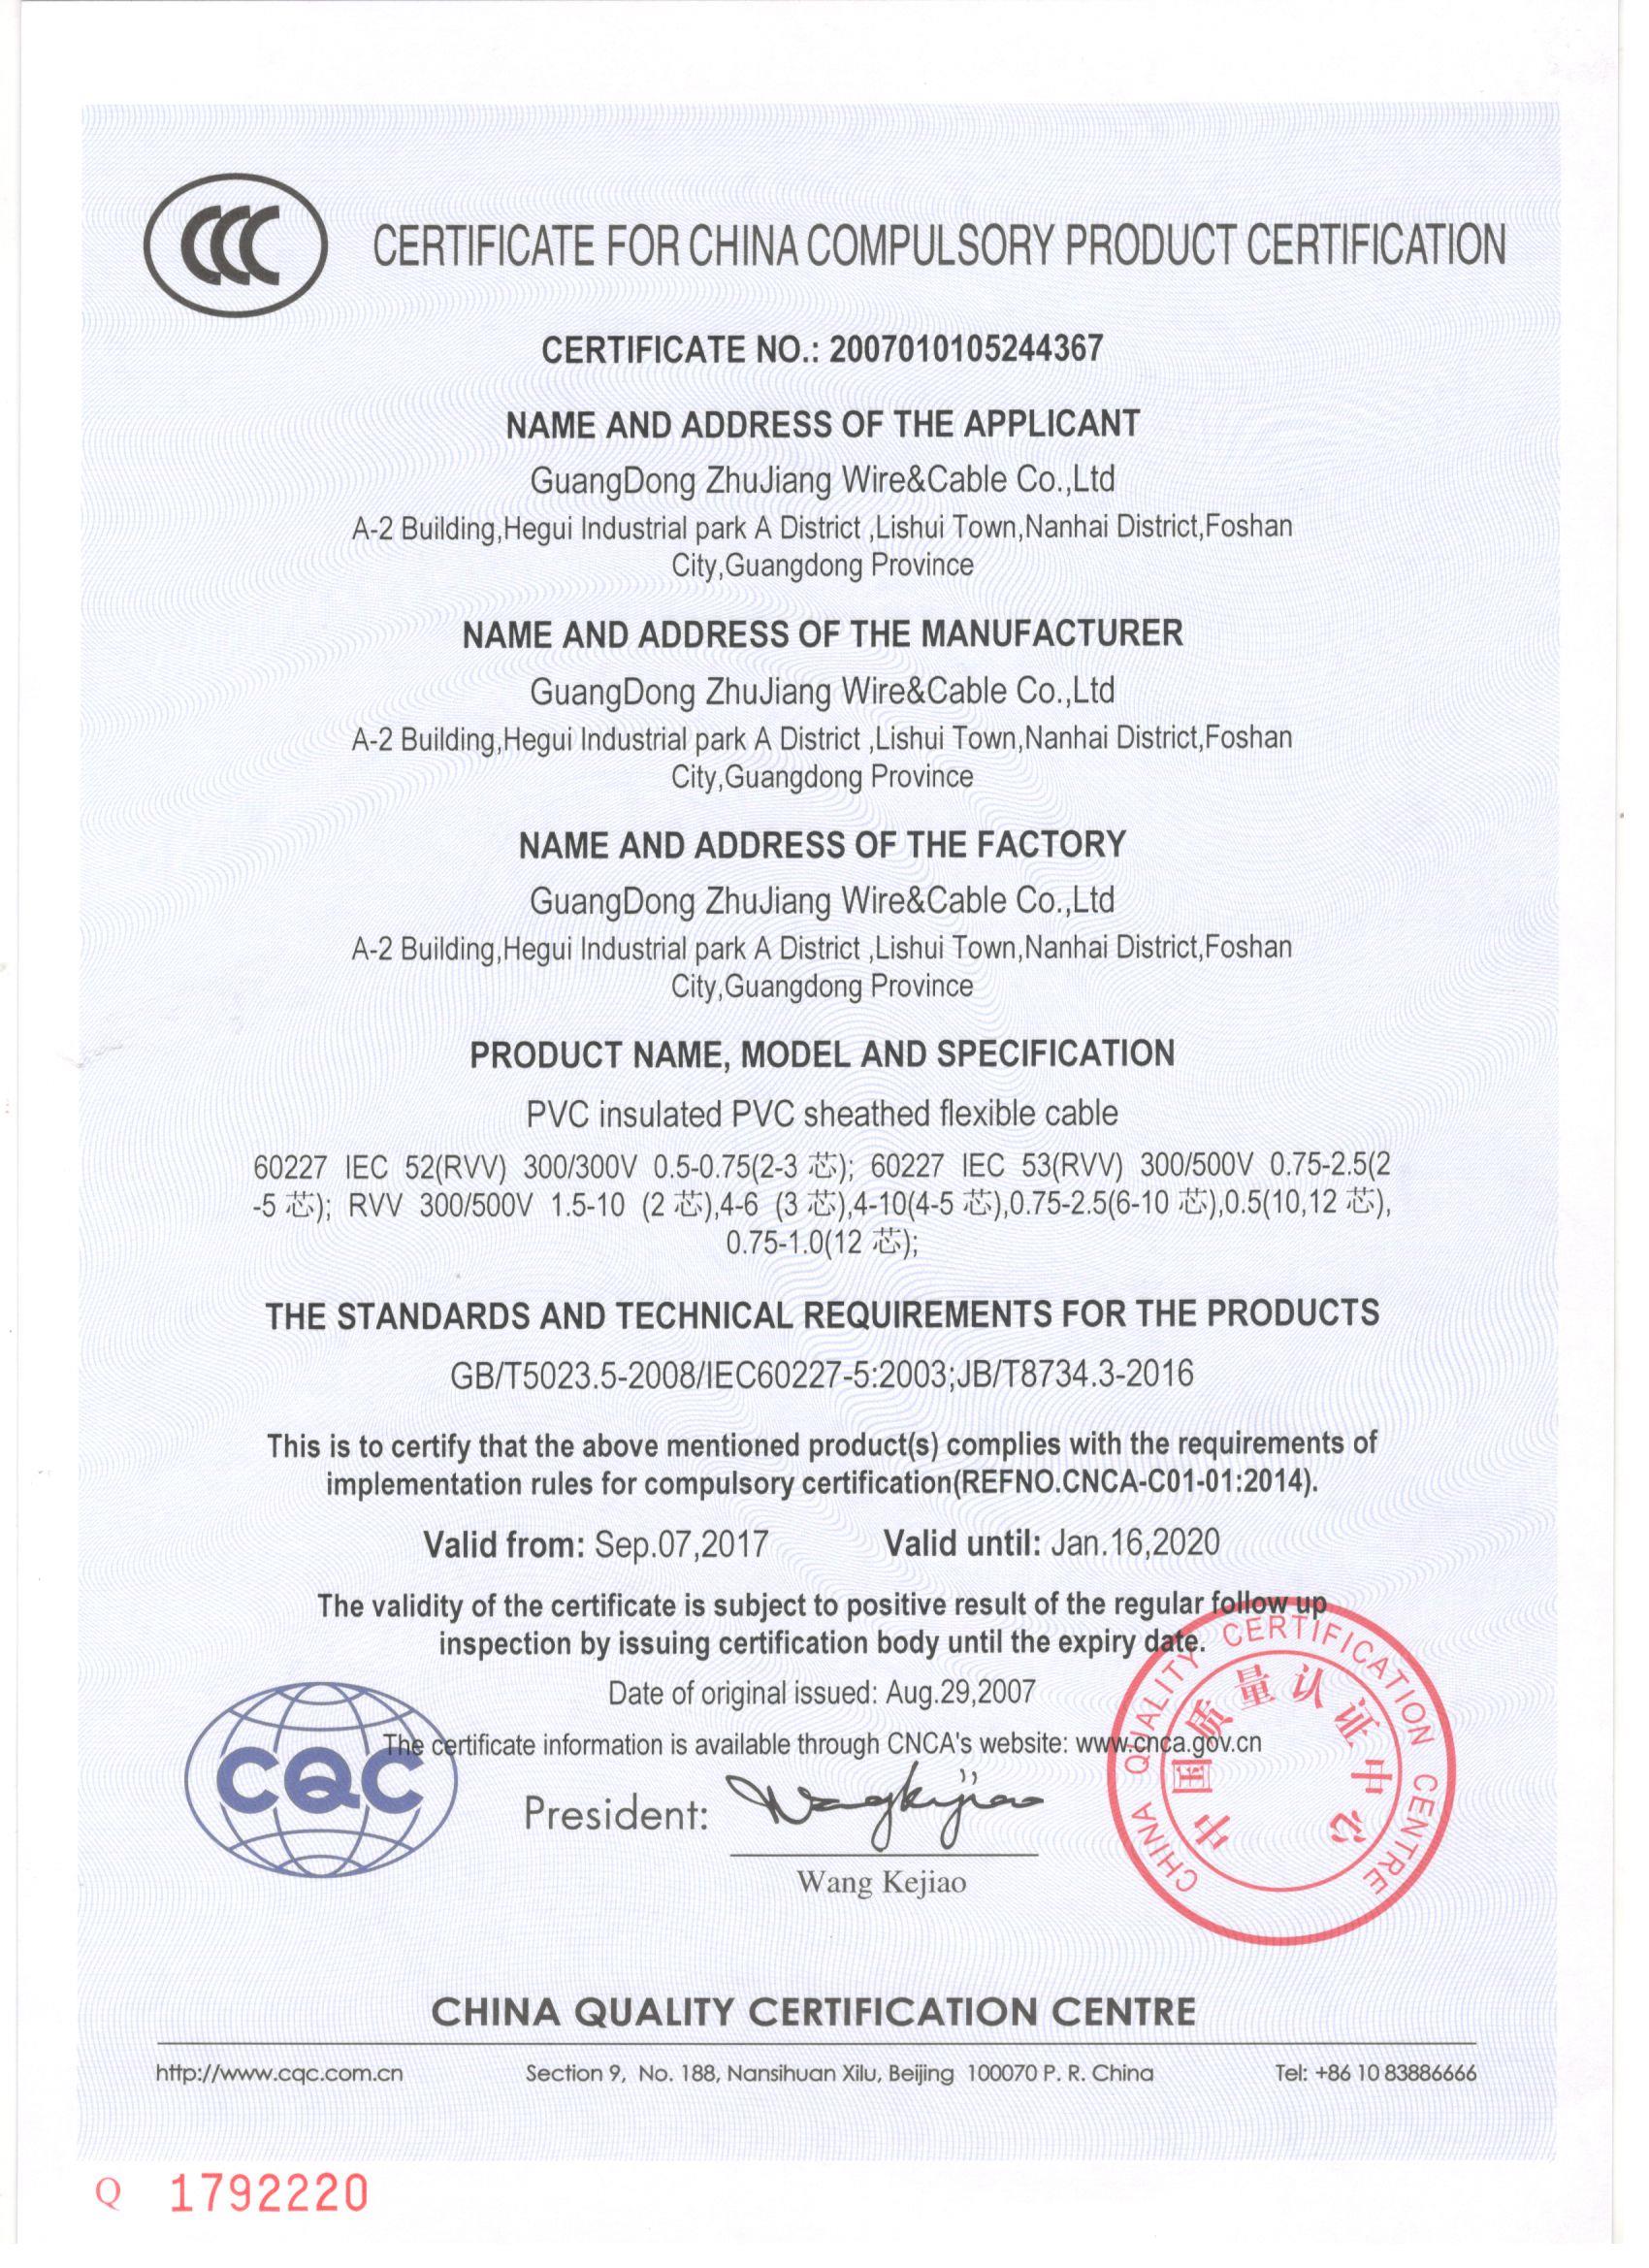 3C National Compulsory Product Certification (367-English)